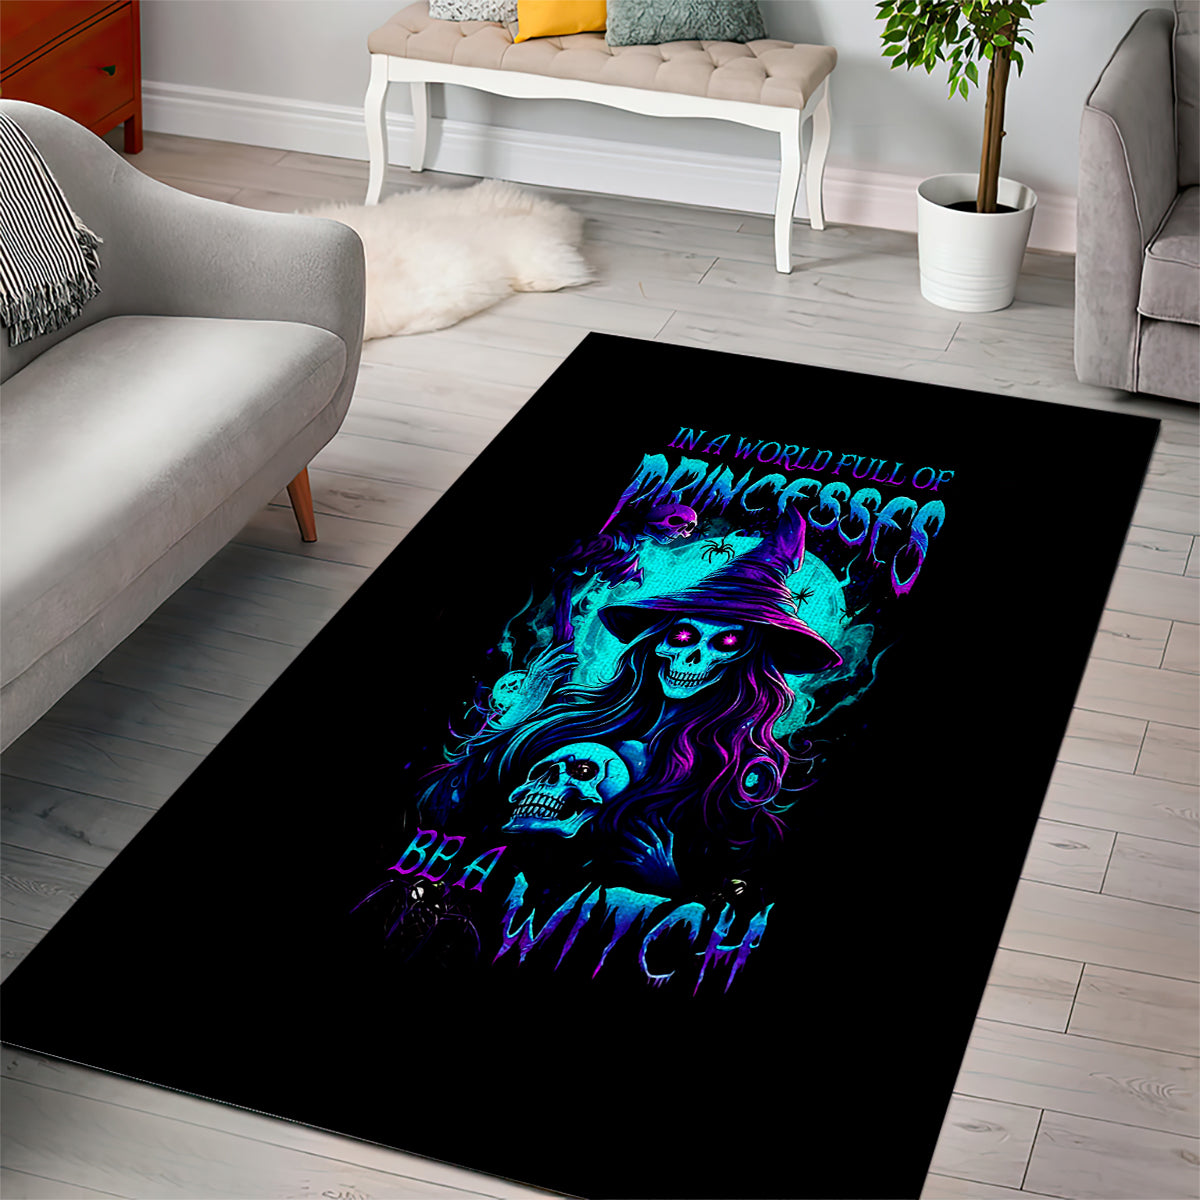 witch-skull-area-rug-in-a-world-full-of-princess-be-a-witch